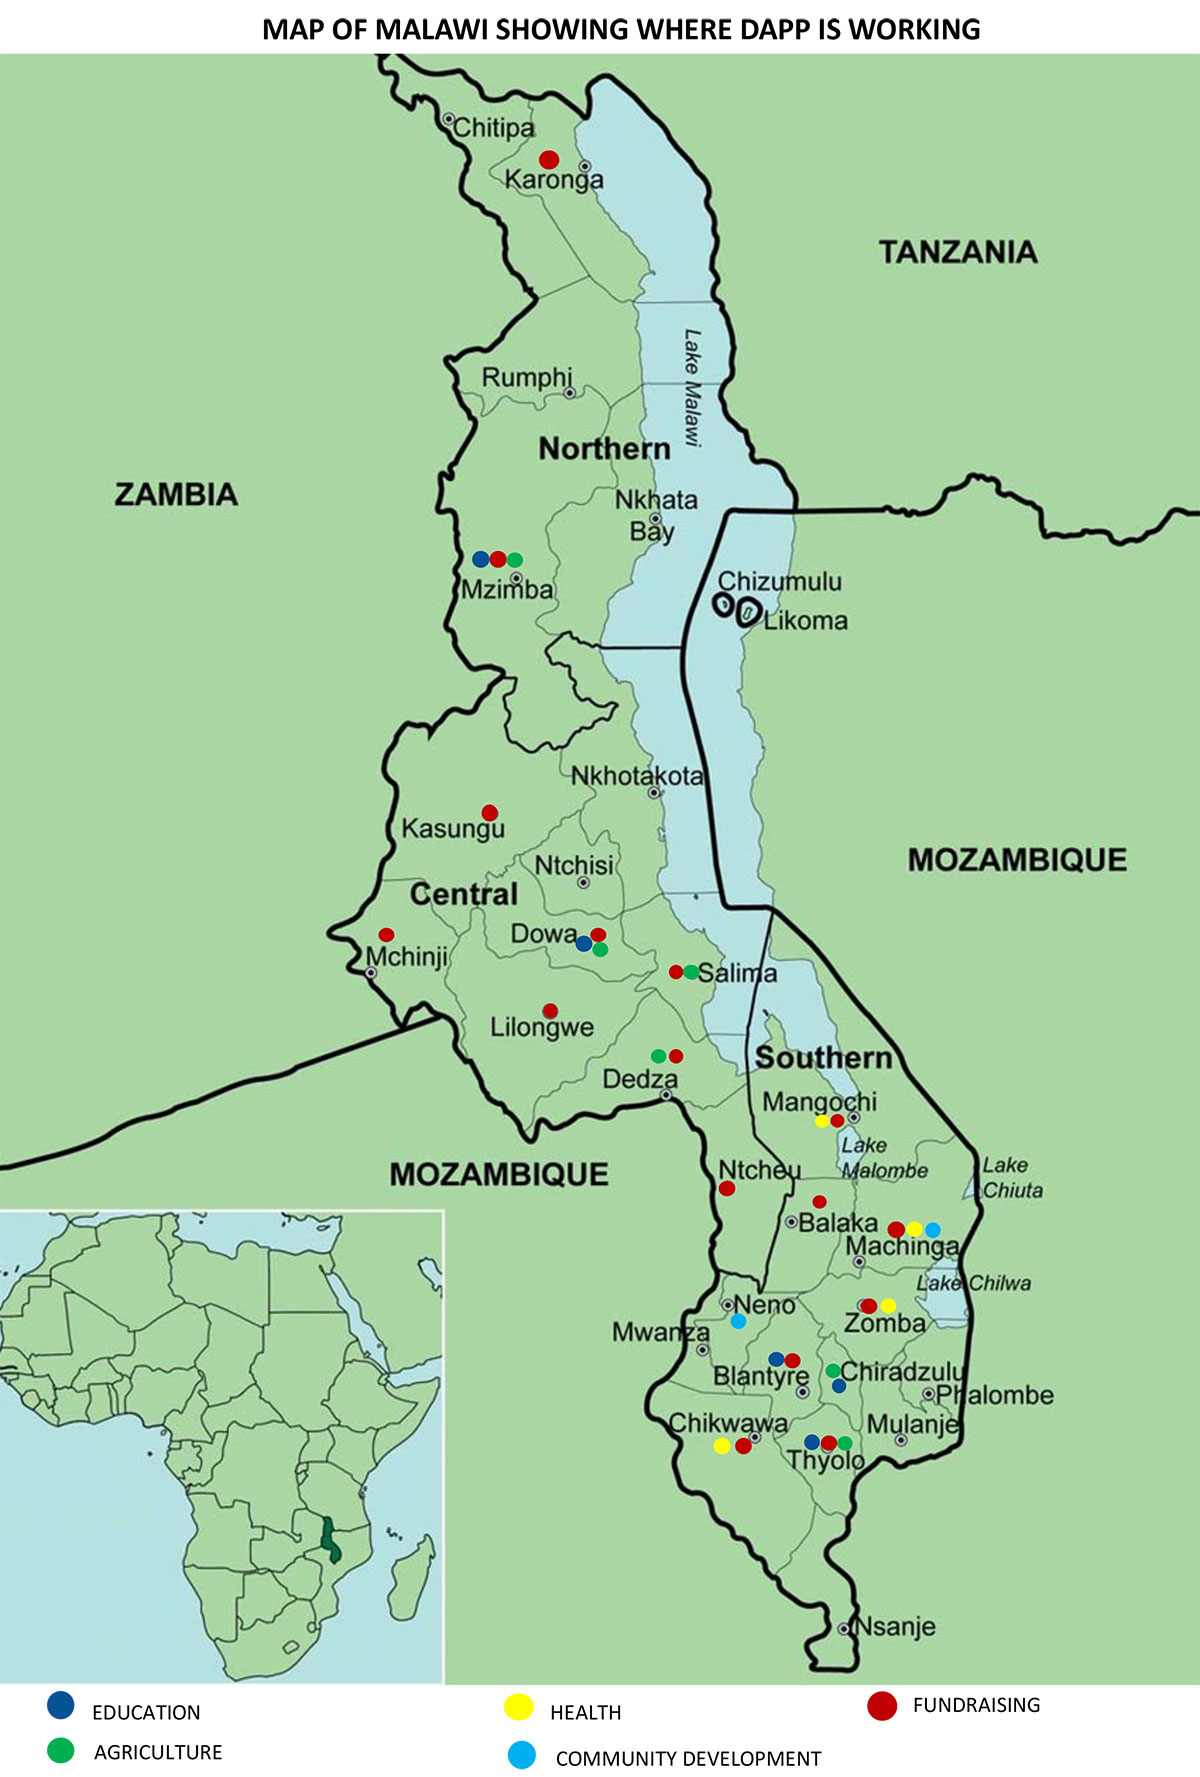 Map of Malawi showing DAPP projects